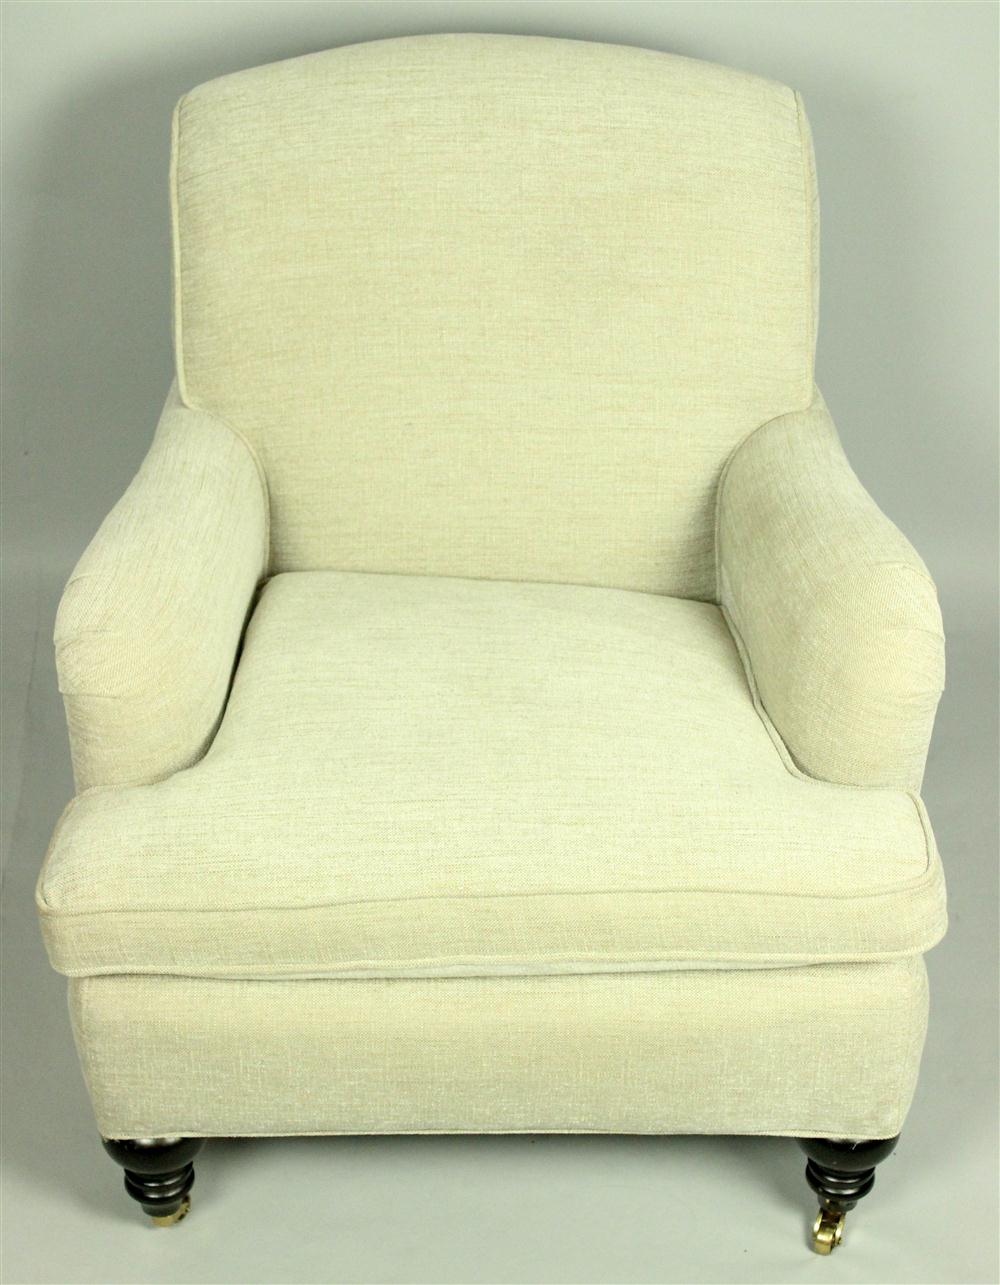 PETITE OFF WHITE UPHOLSTERED CLUB 146d8c